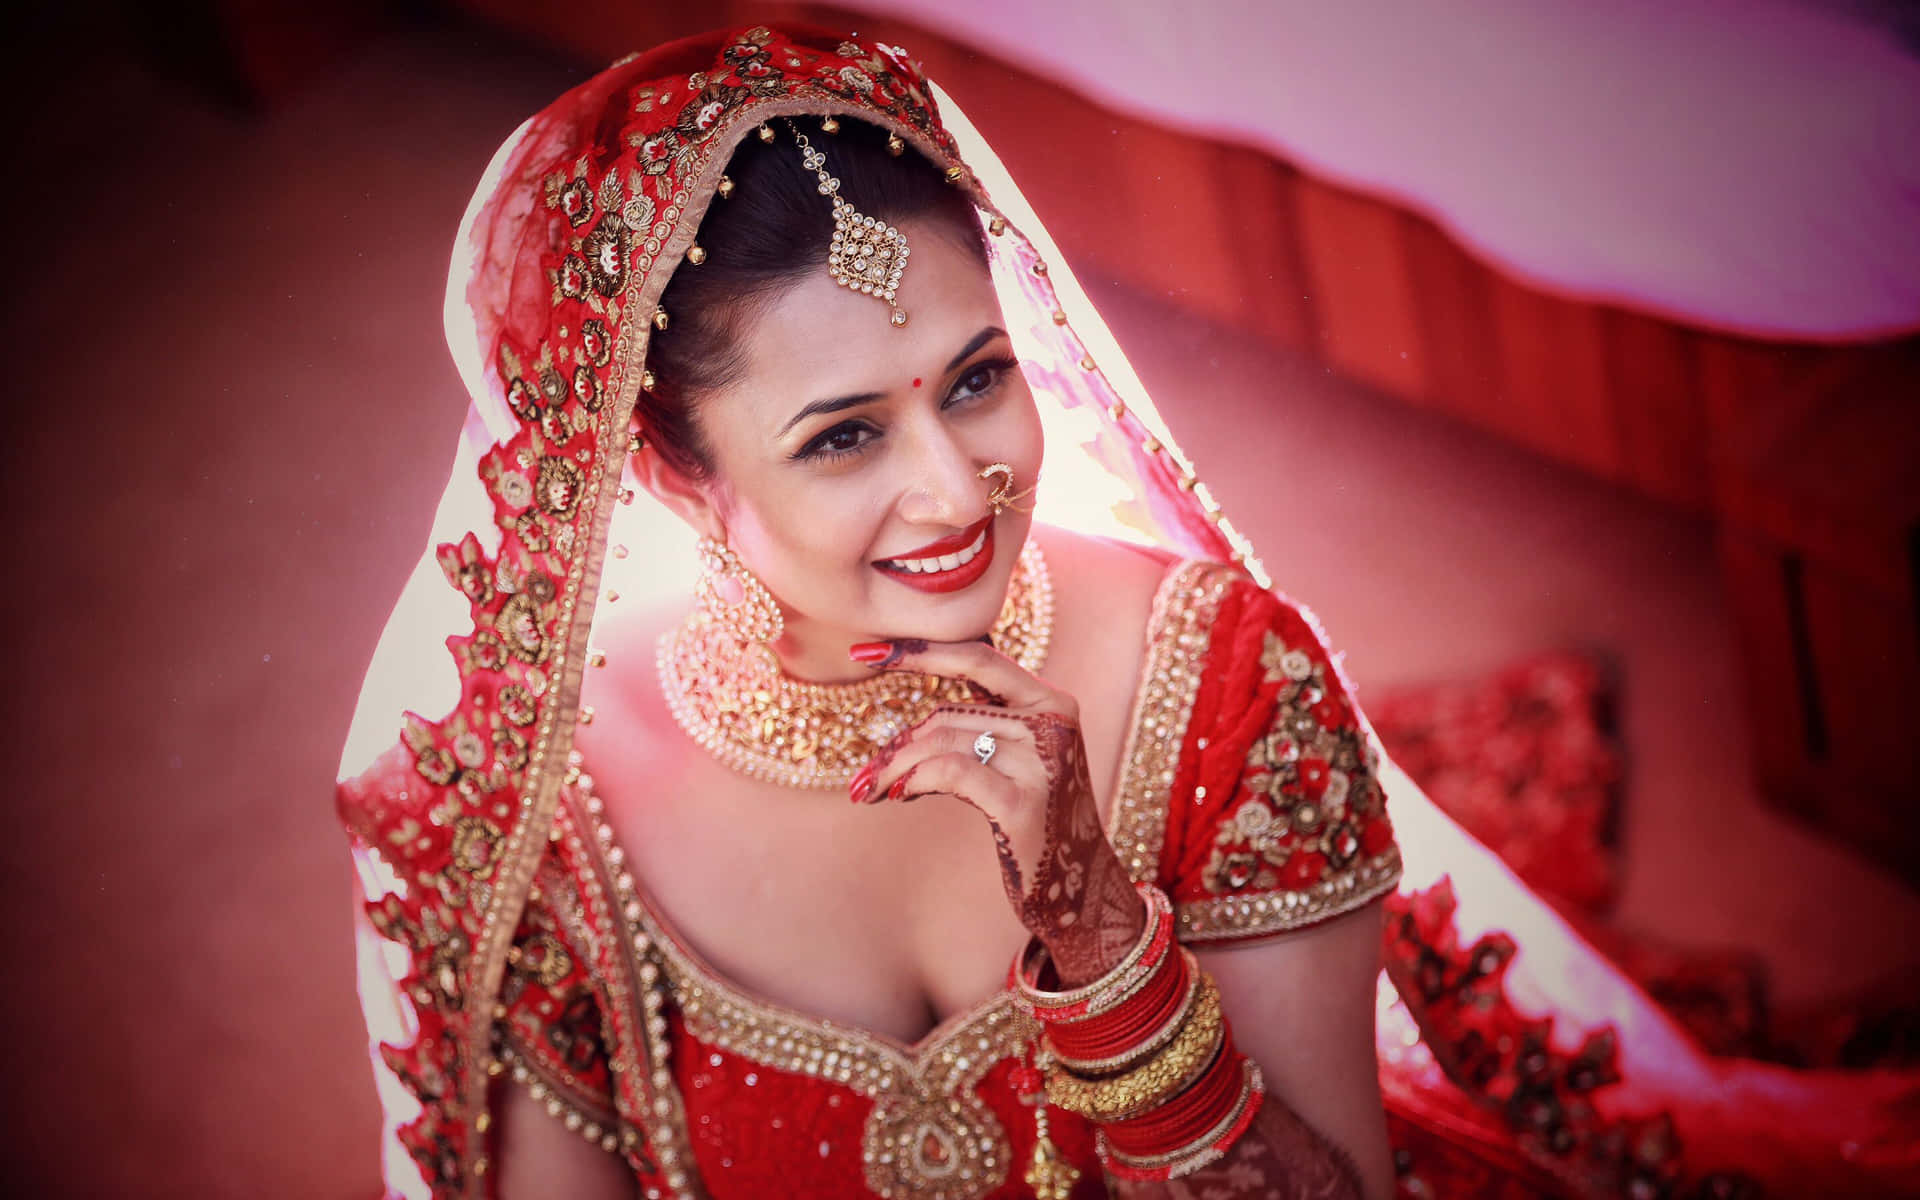 A Bride In Red And Gold In A Bed